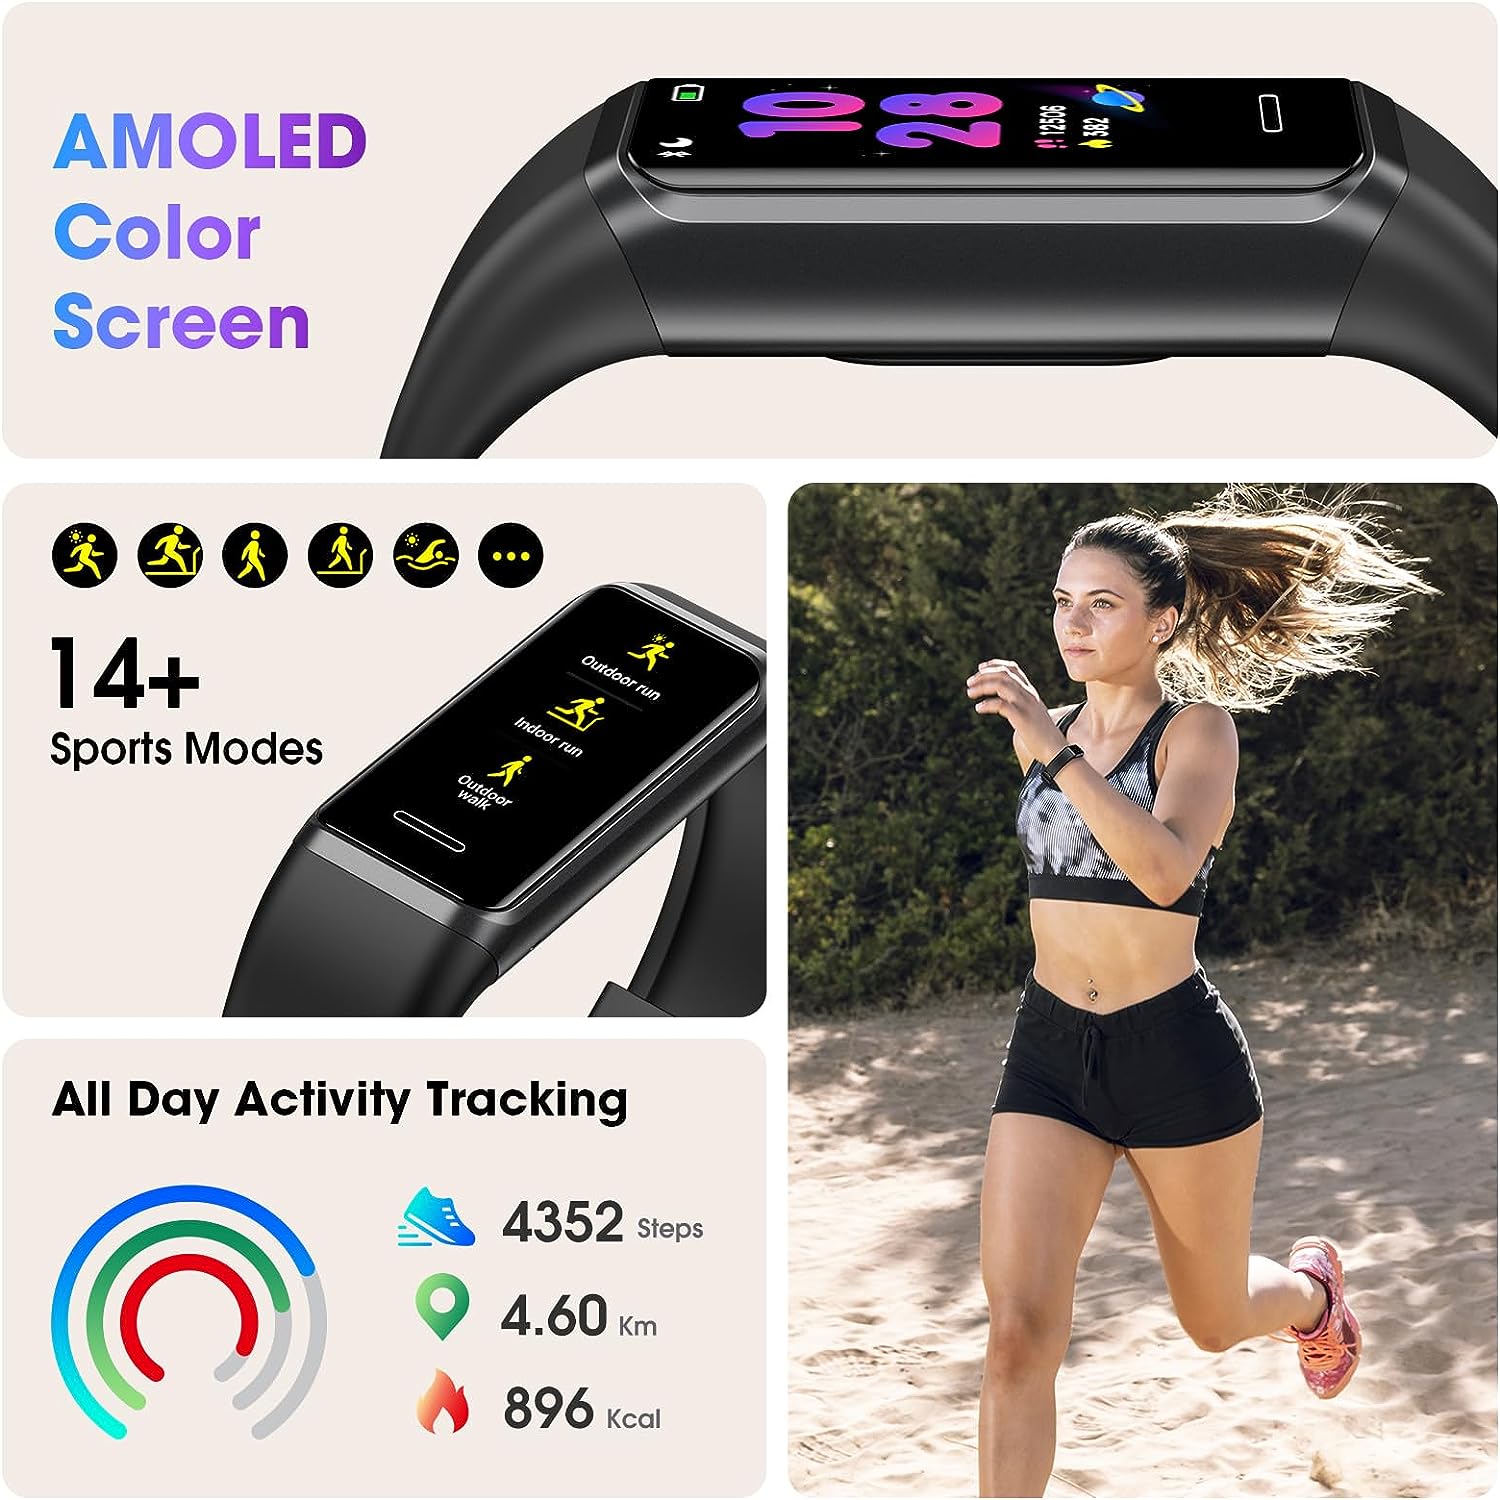 LIVIKEY Fitness Tracker Watch with Heart Rate Monitor, Step Counter IP67 Waterproof Activity Tracker with Pedometer & Sleep Monitor, Calories, Step Tracking for Women Men Compatible with Android iOS